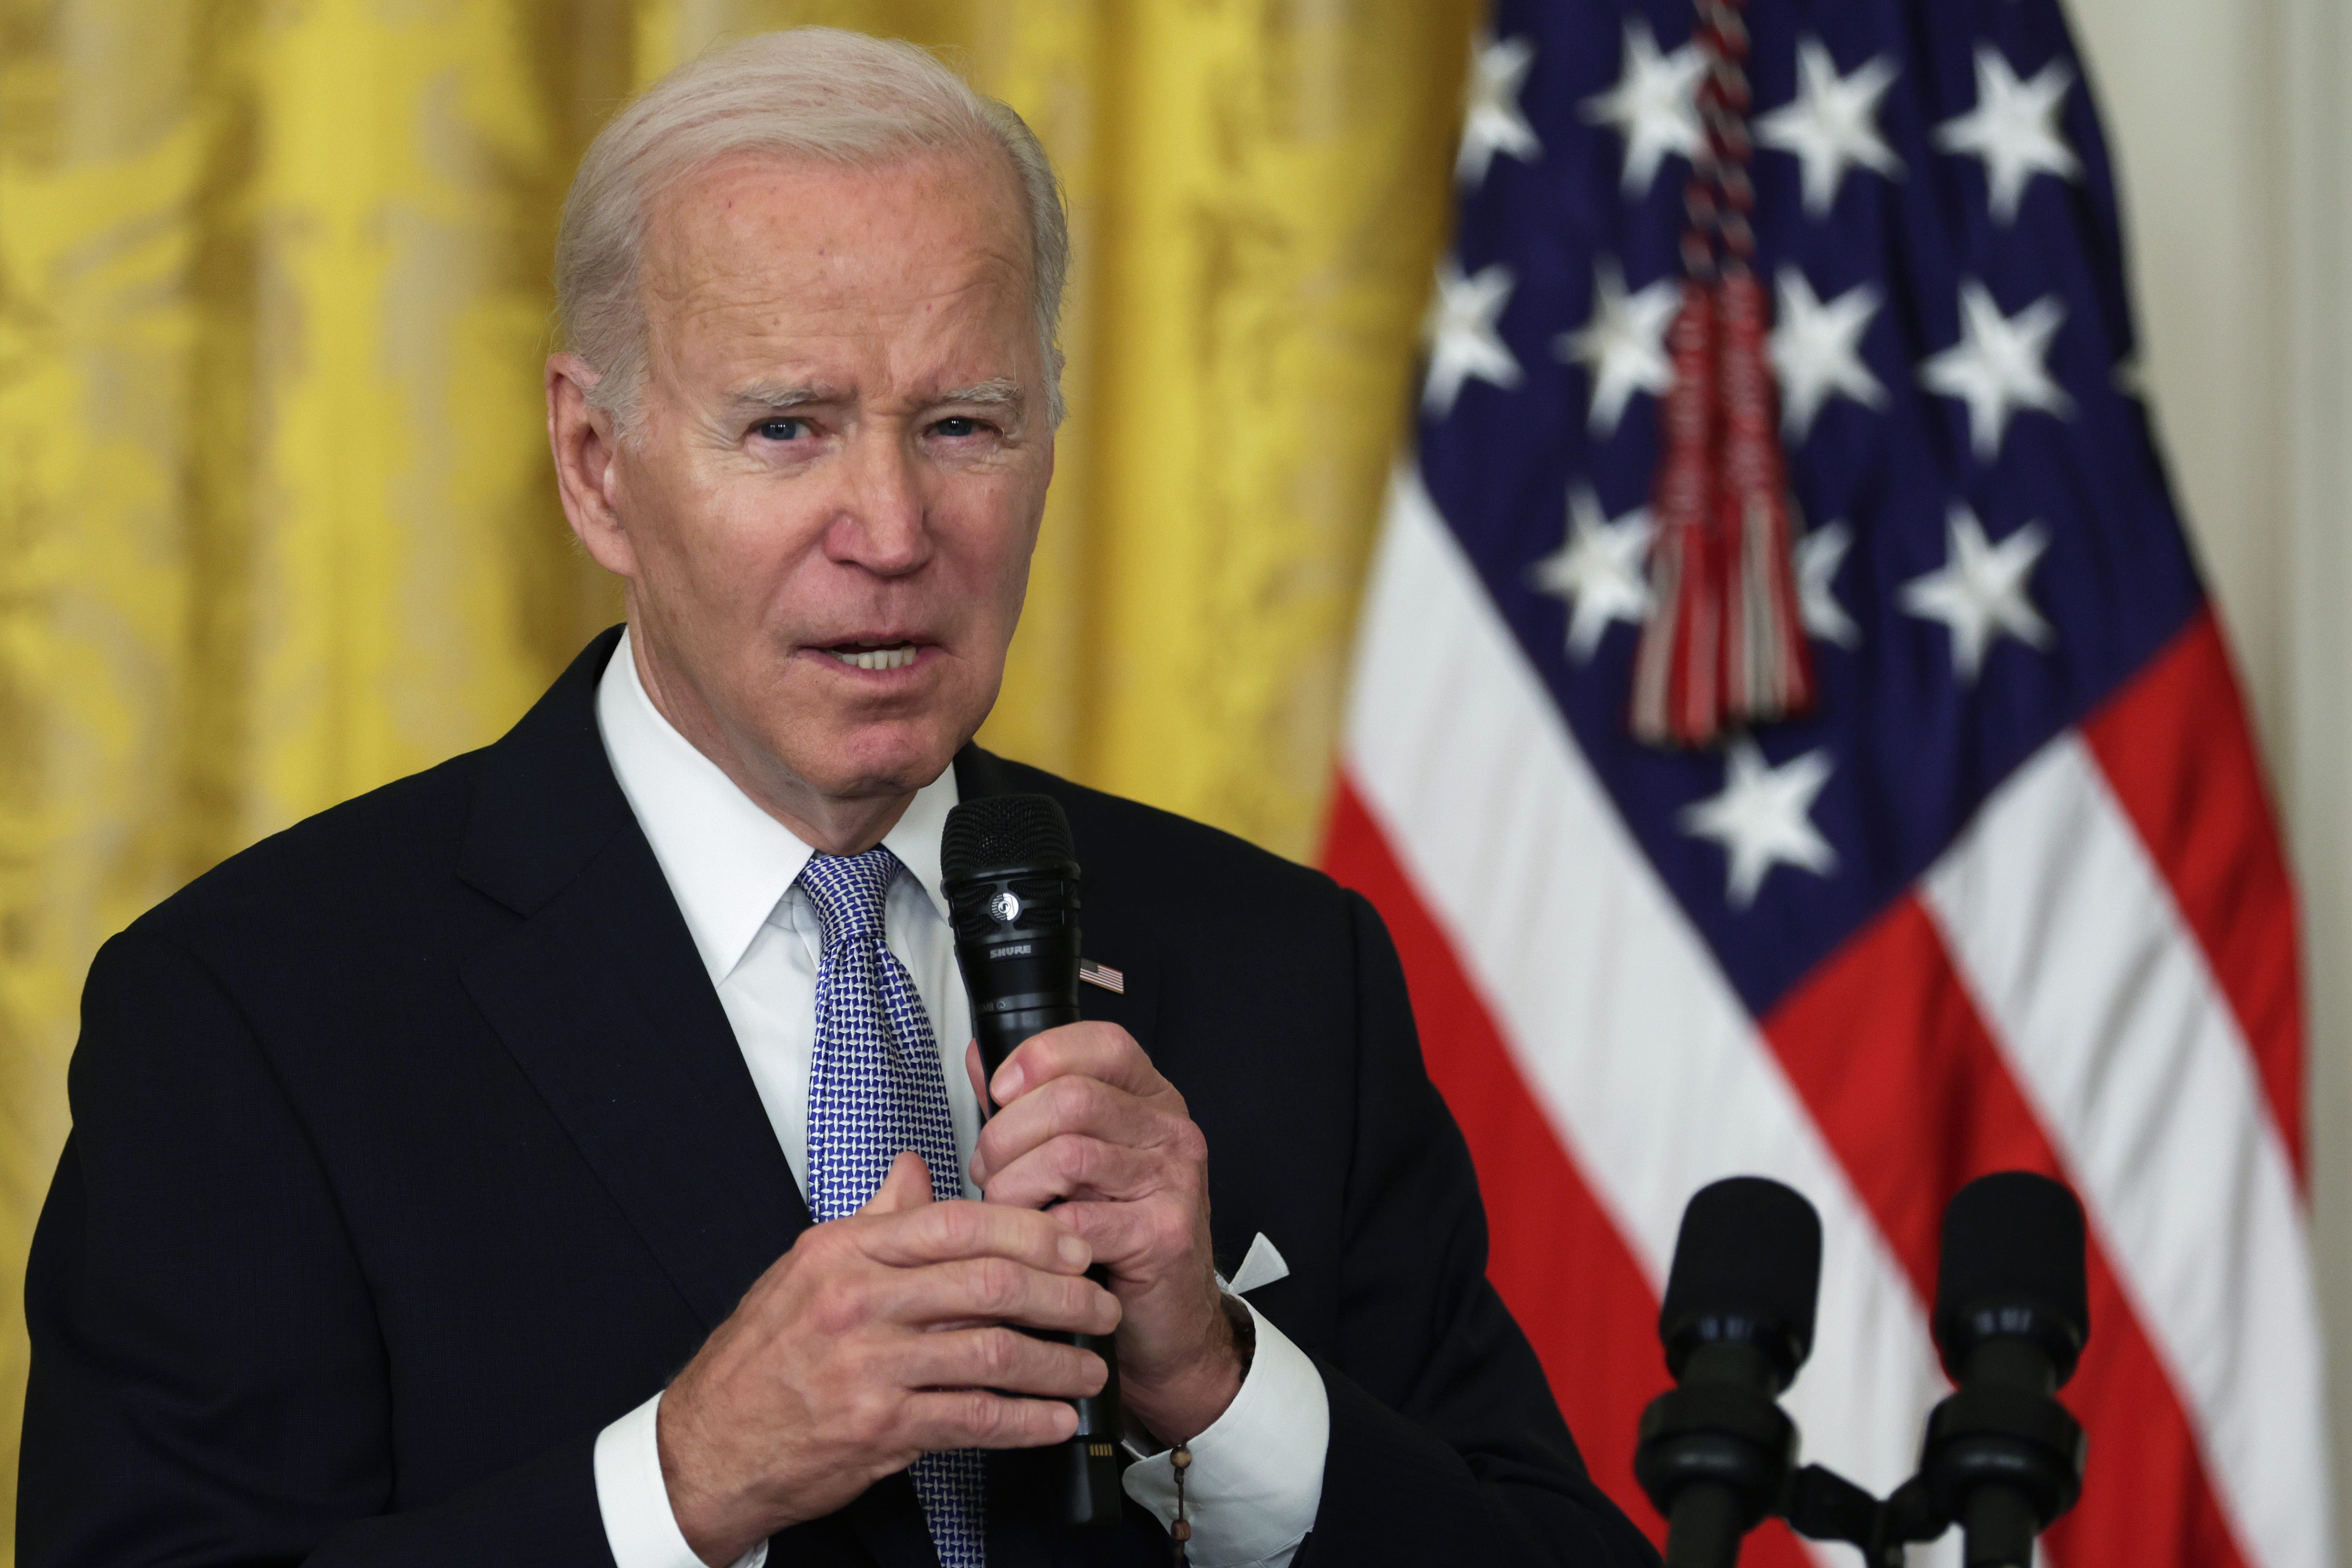 As revelations grow on Joe Biden's handling of classified documents, here's what we know so far